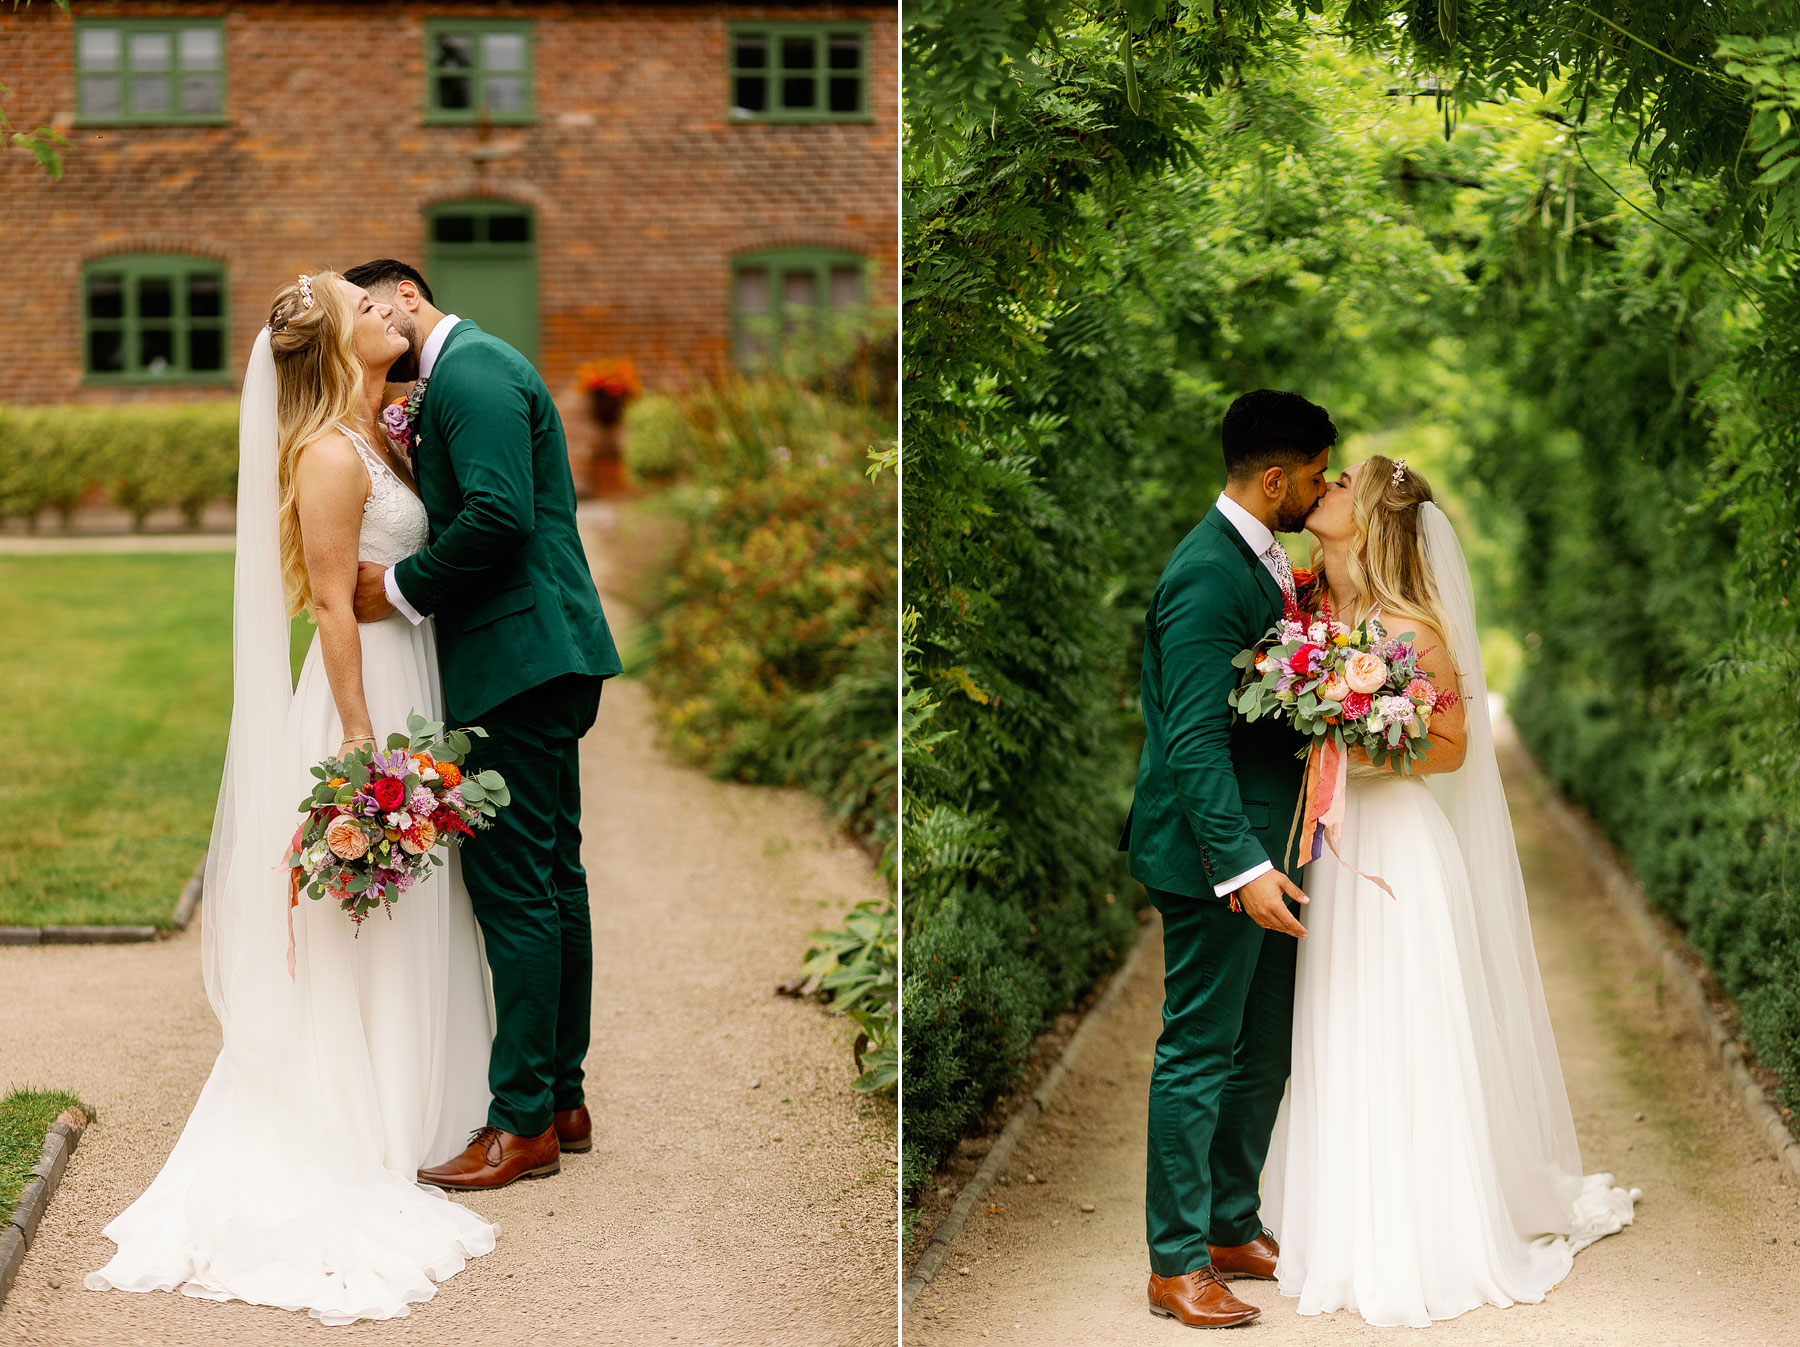 colourful and fun wedding at thorpe garden in staffordshire